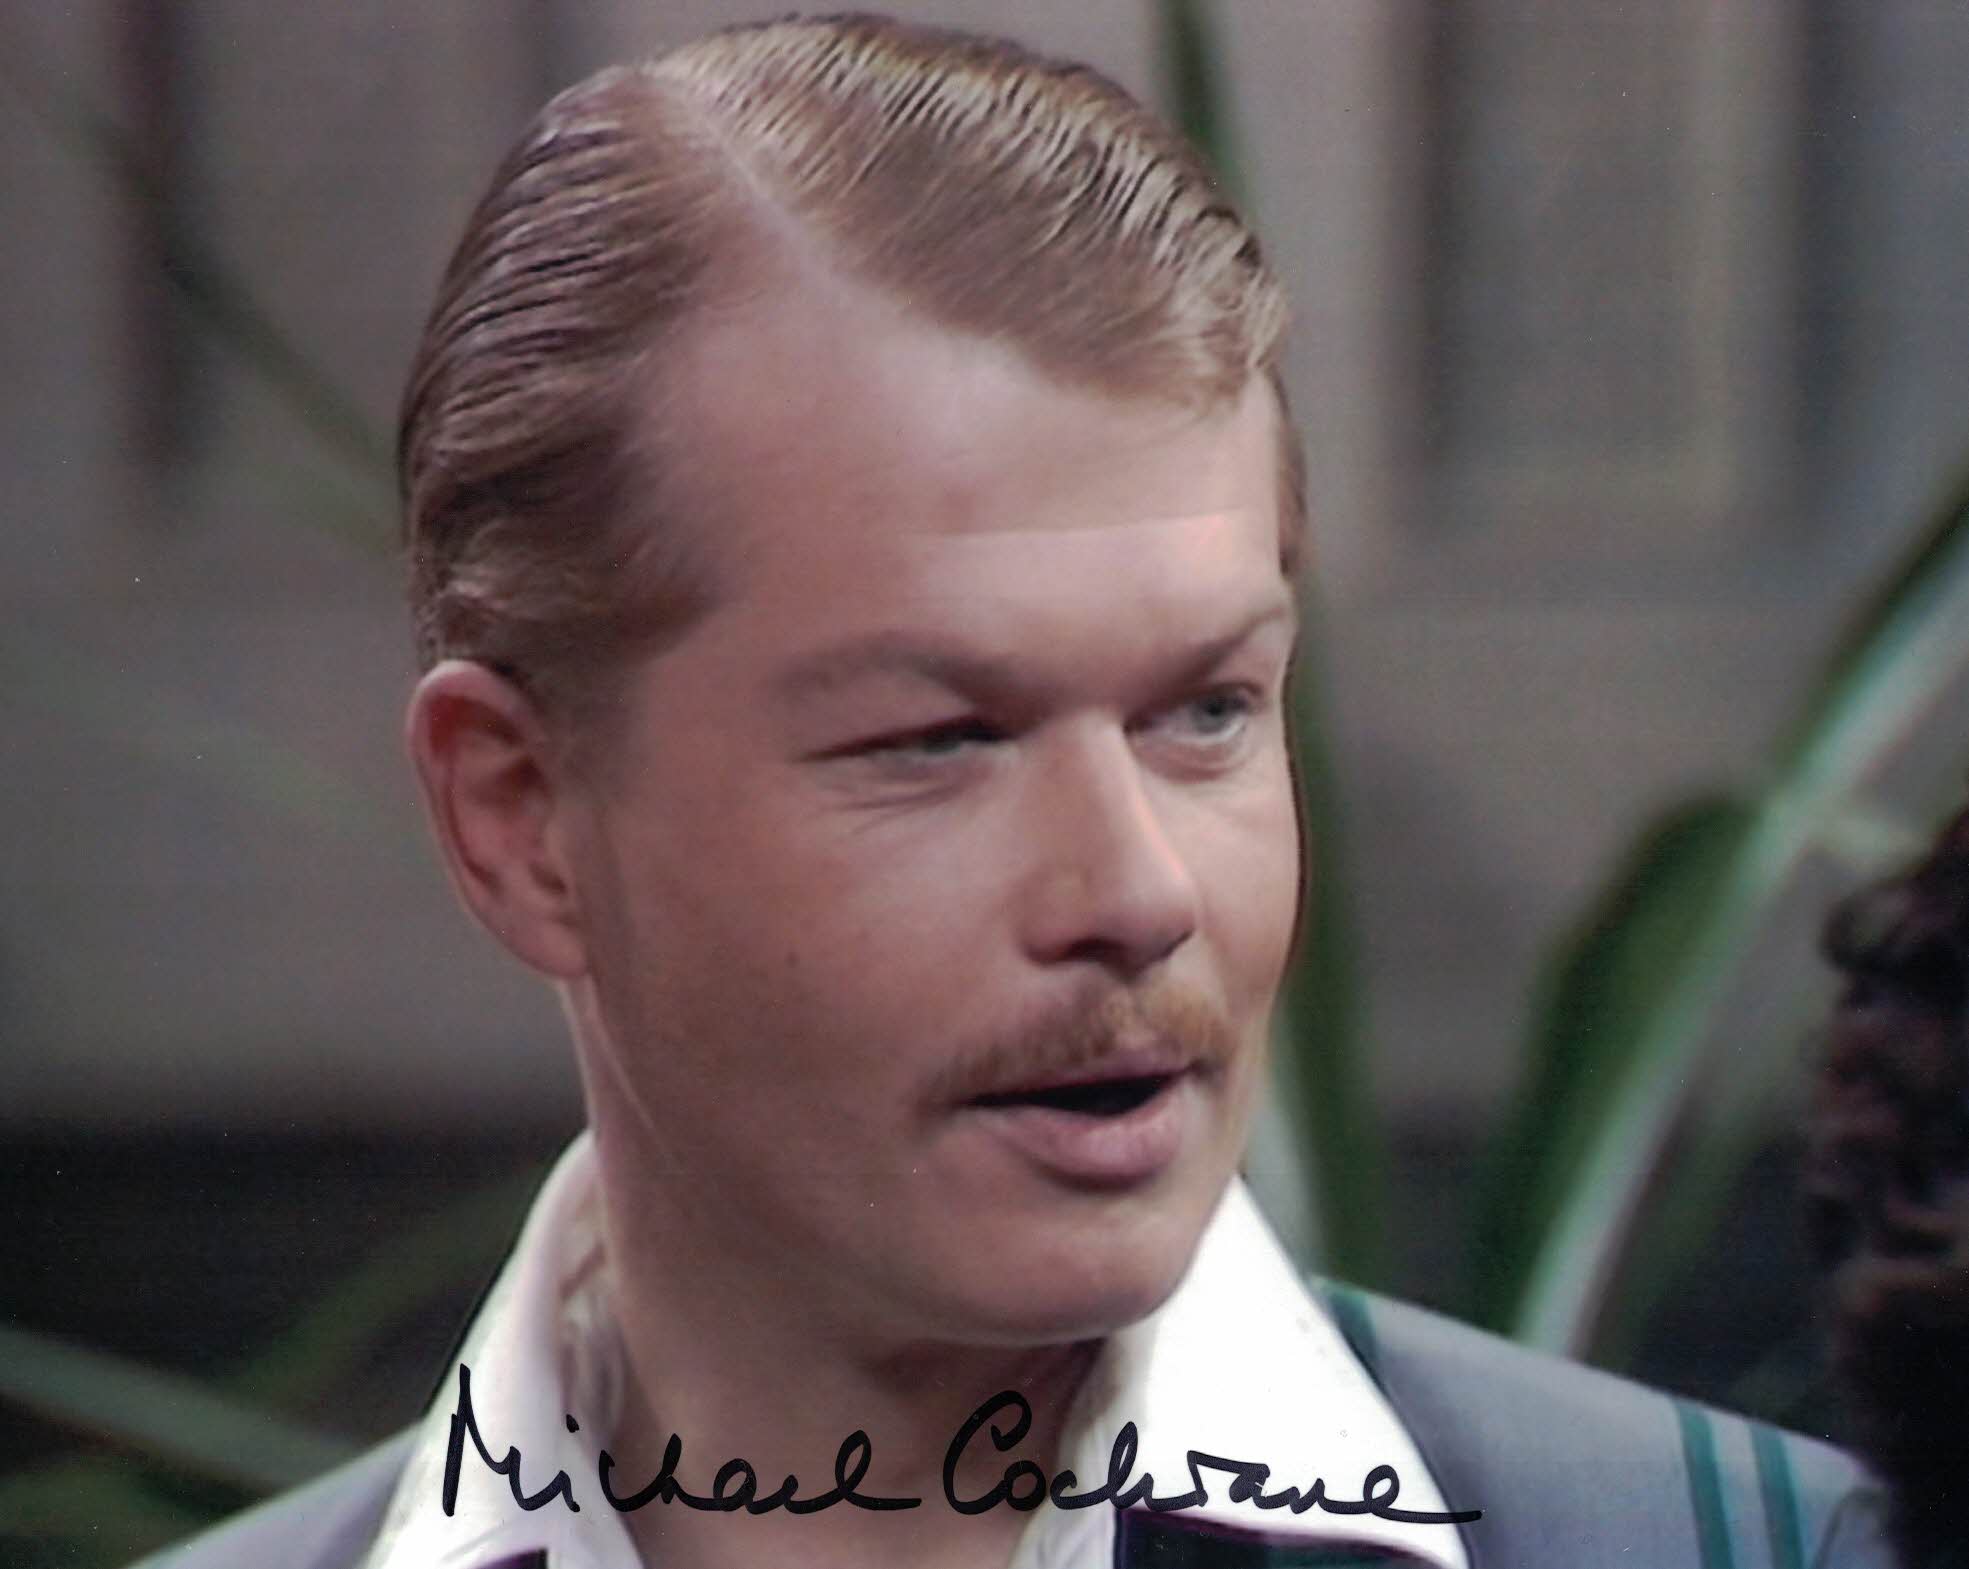 MICHAEL COCHRANE - Lord Cranleigh in Black Orchid - Doctor Who hand signed 10 x 8